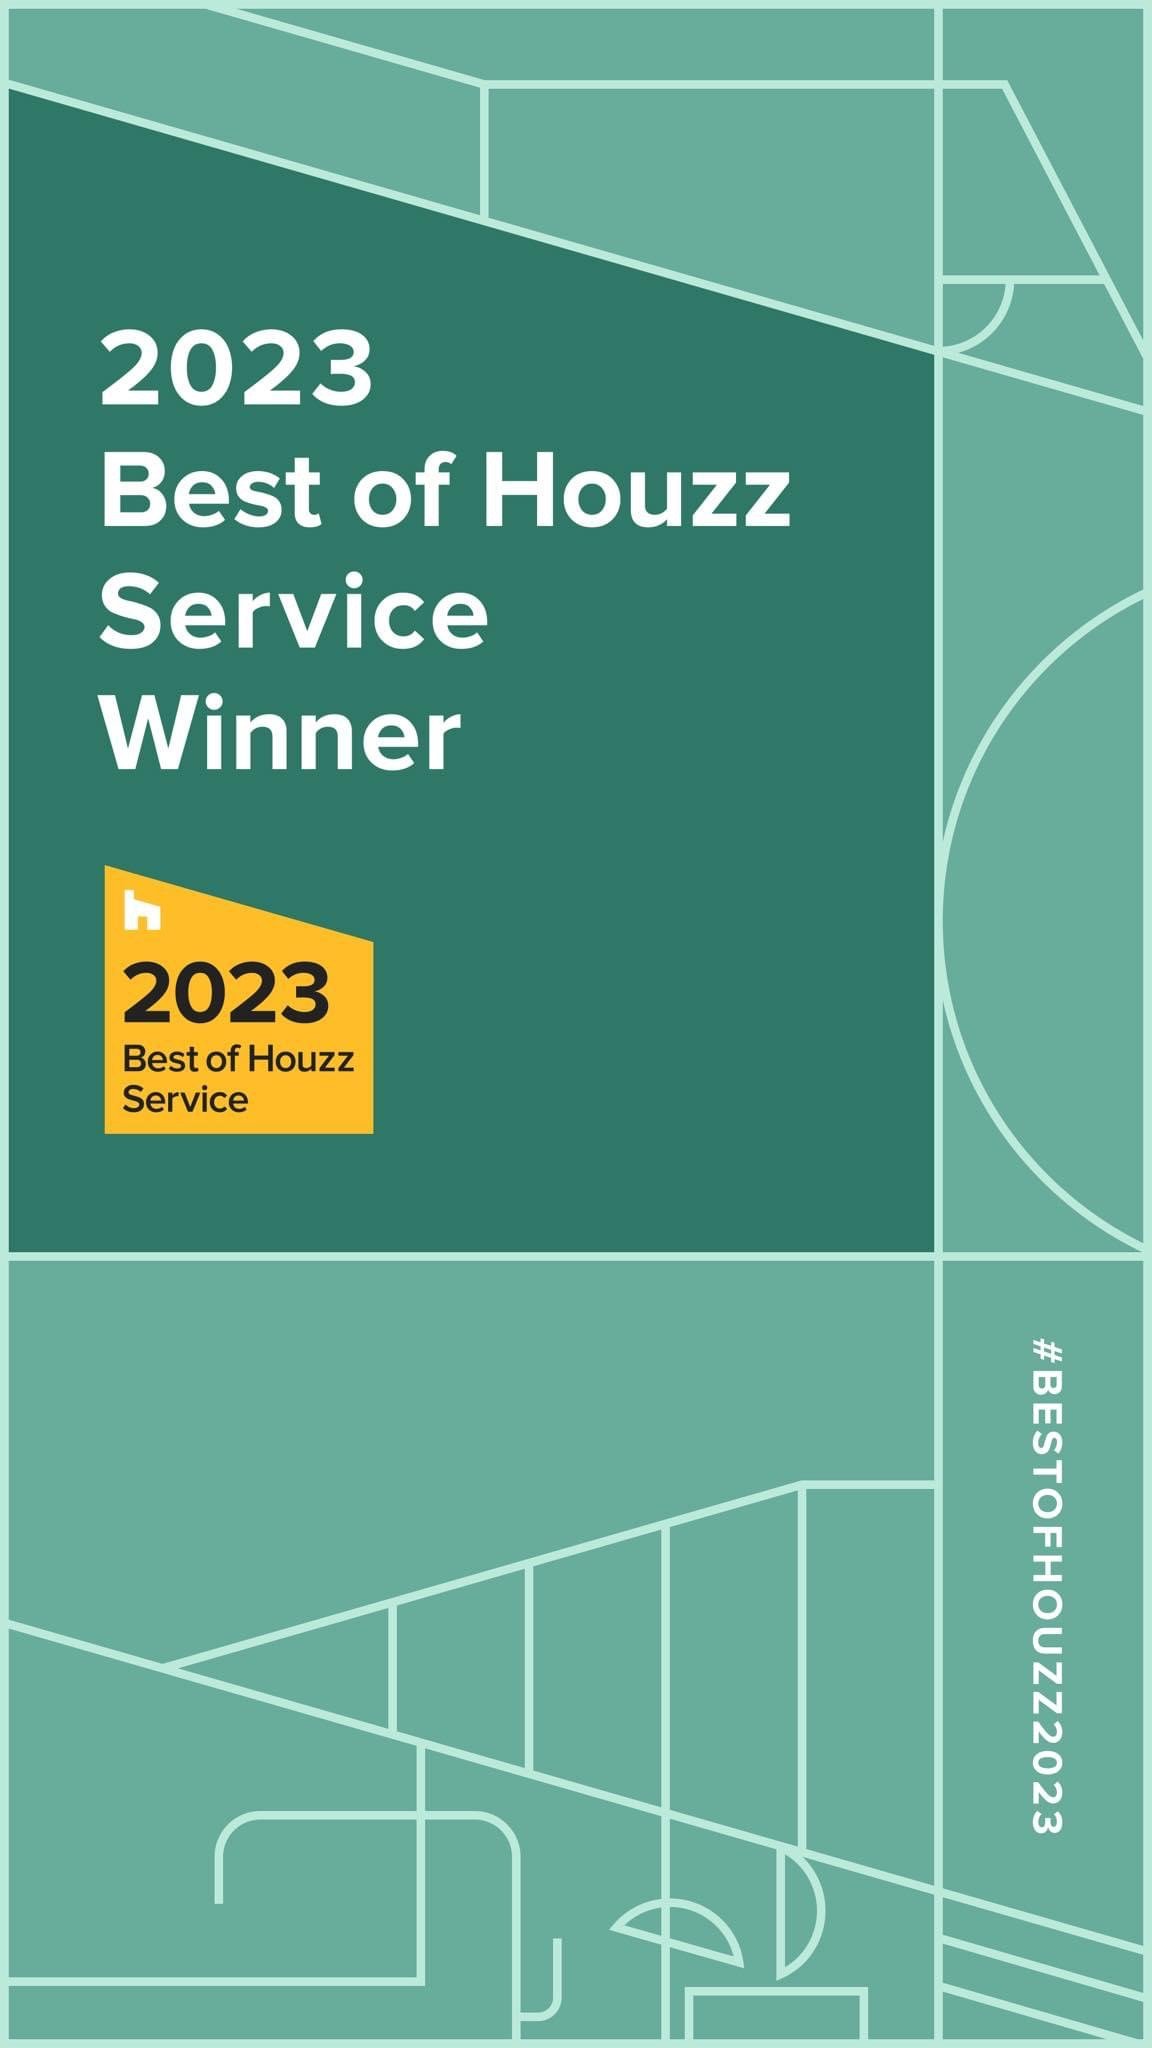 Best of Houzz in category of client service for 7 years running 